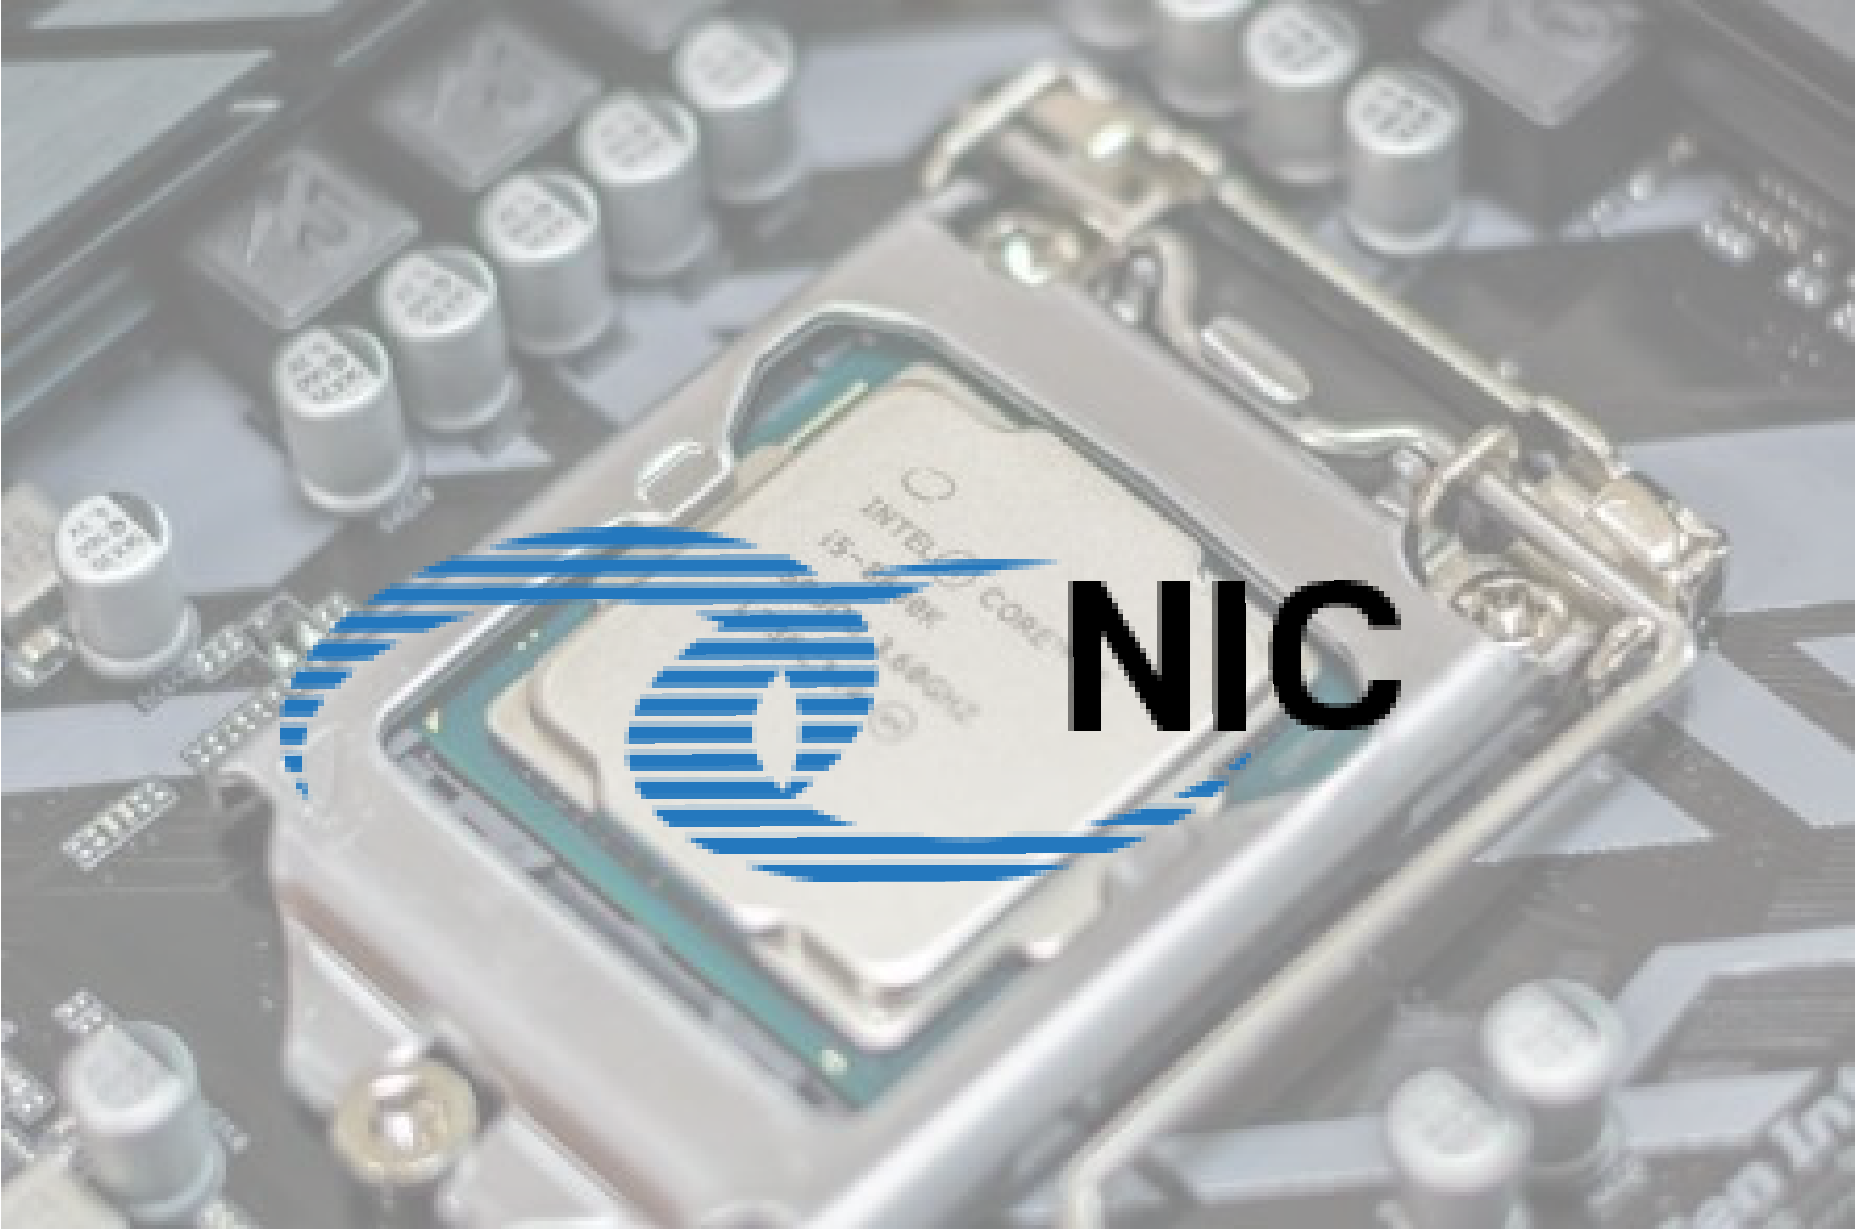 component image with NIC logo (centered)